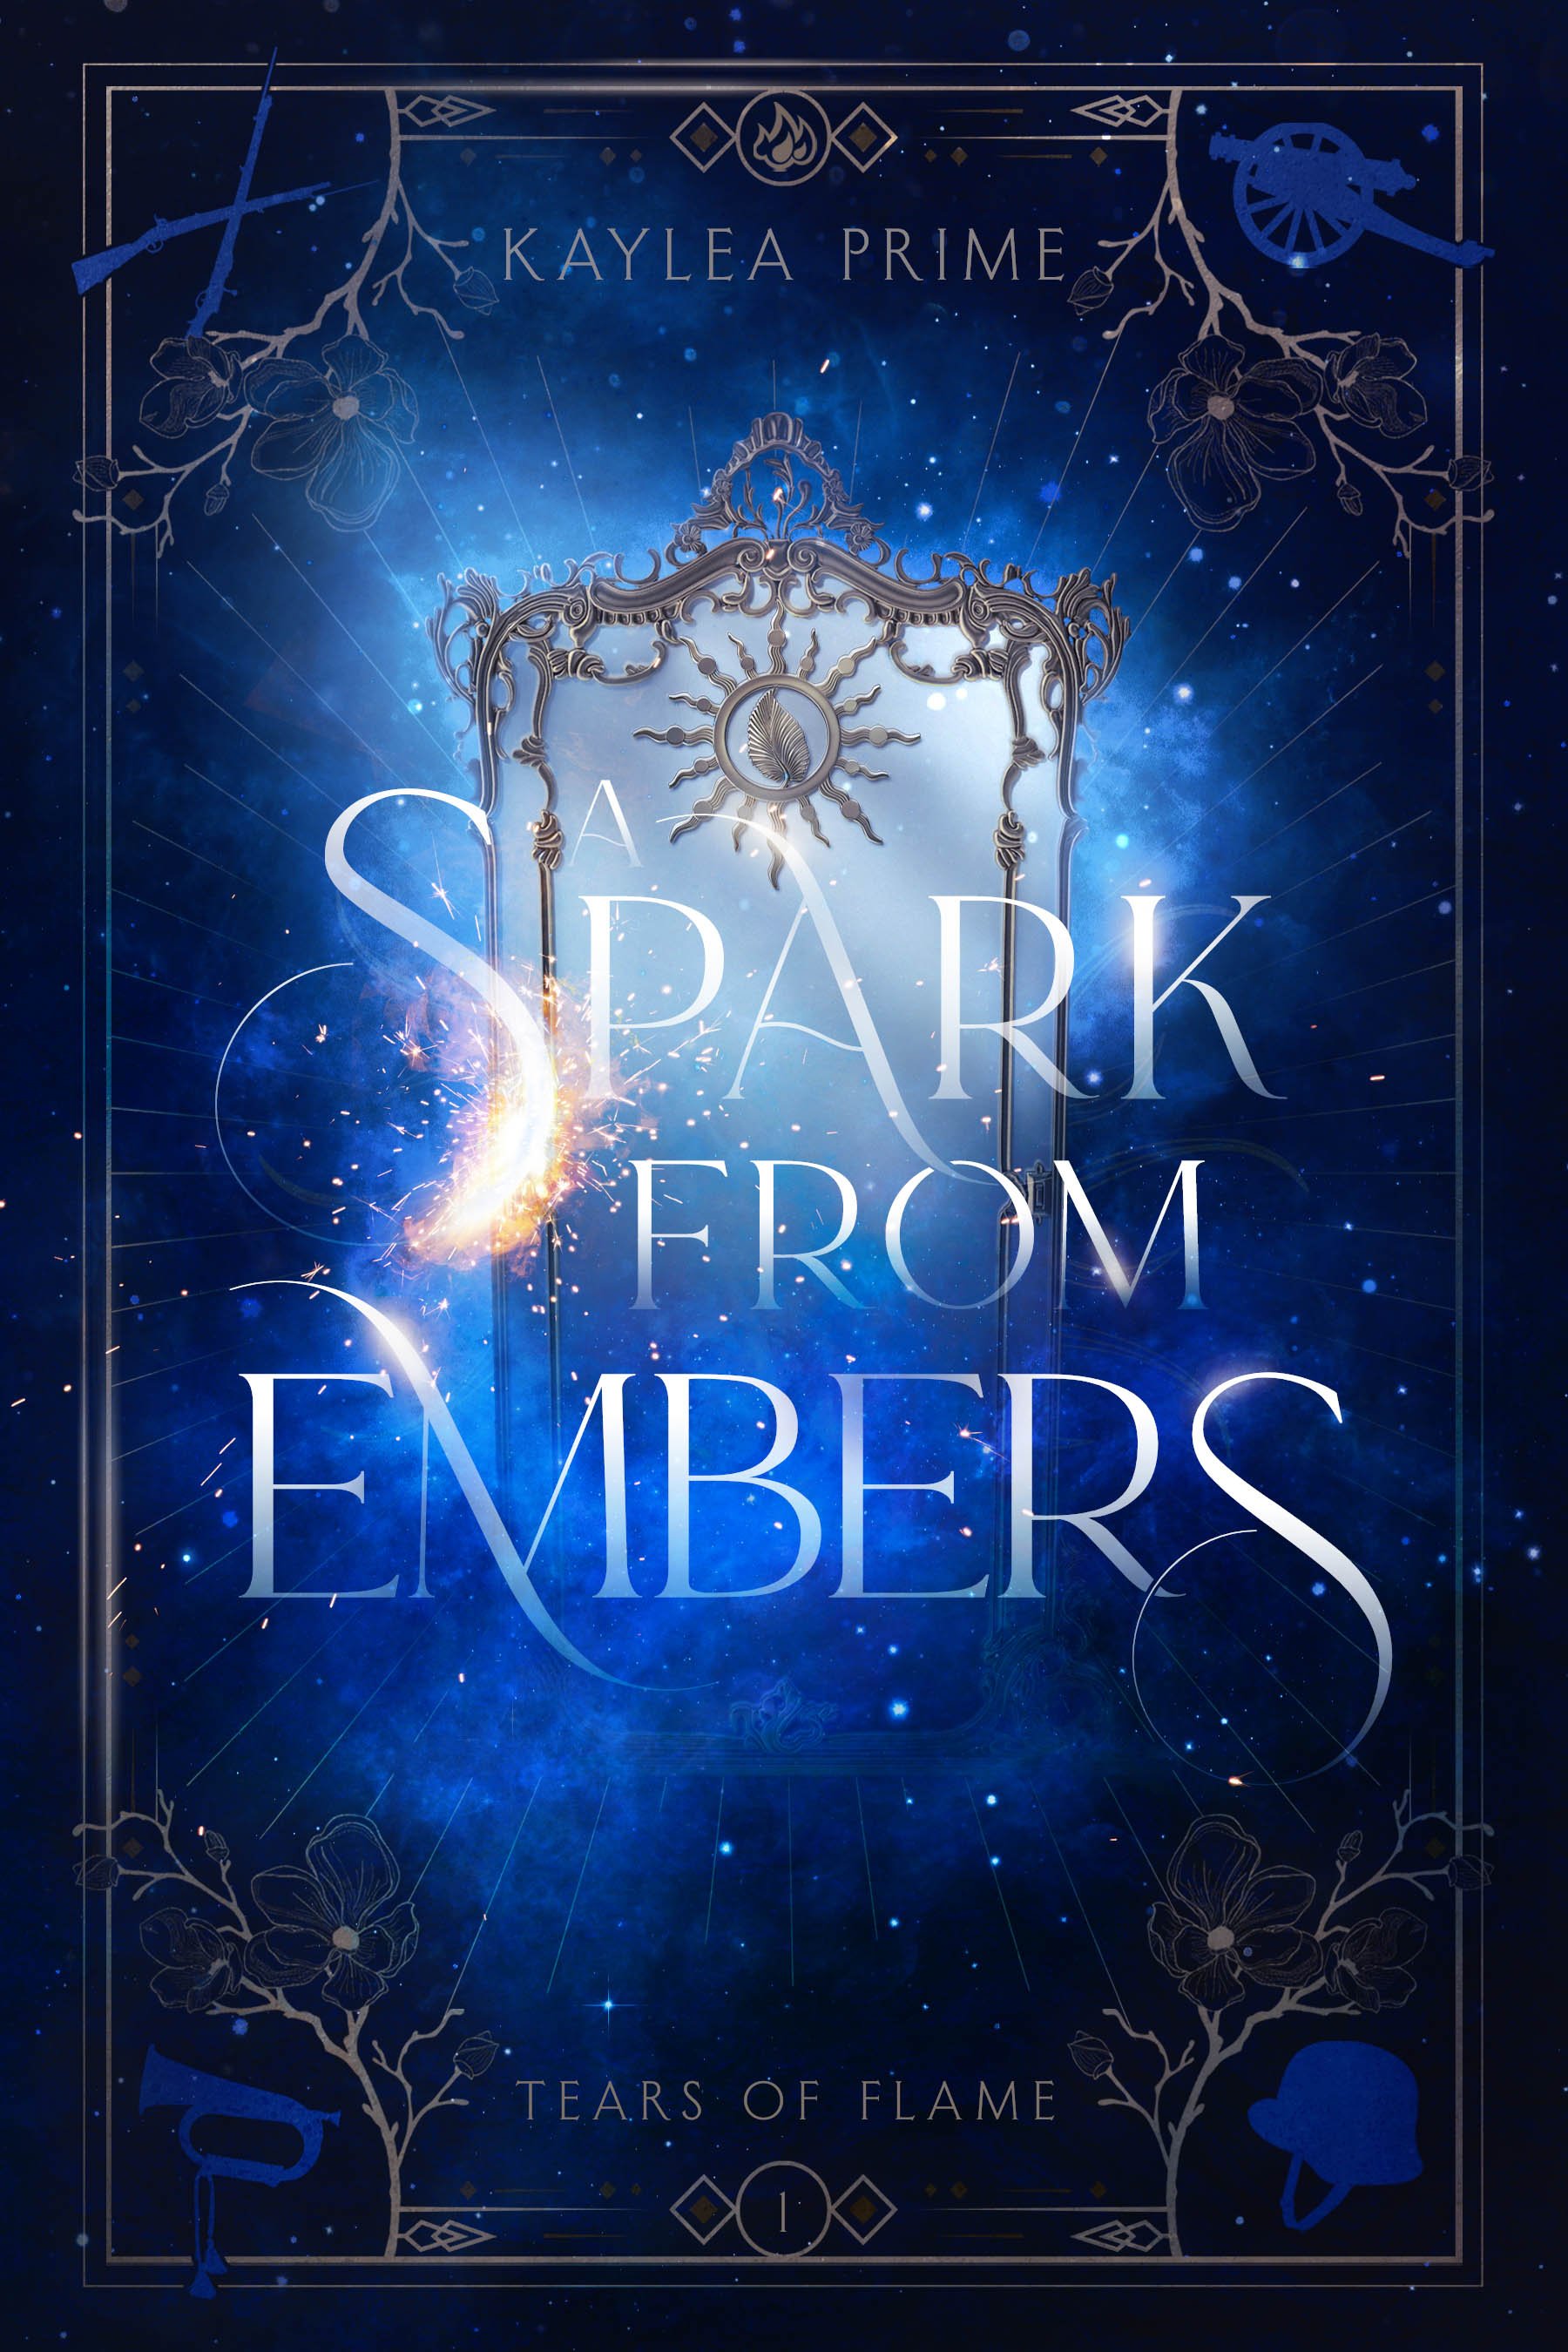 A Spark from Embers by Kaylea Prime